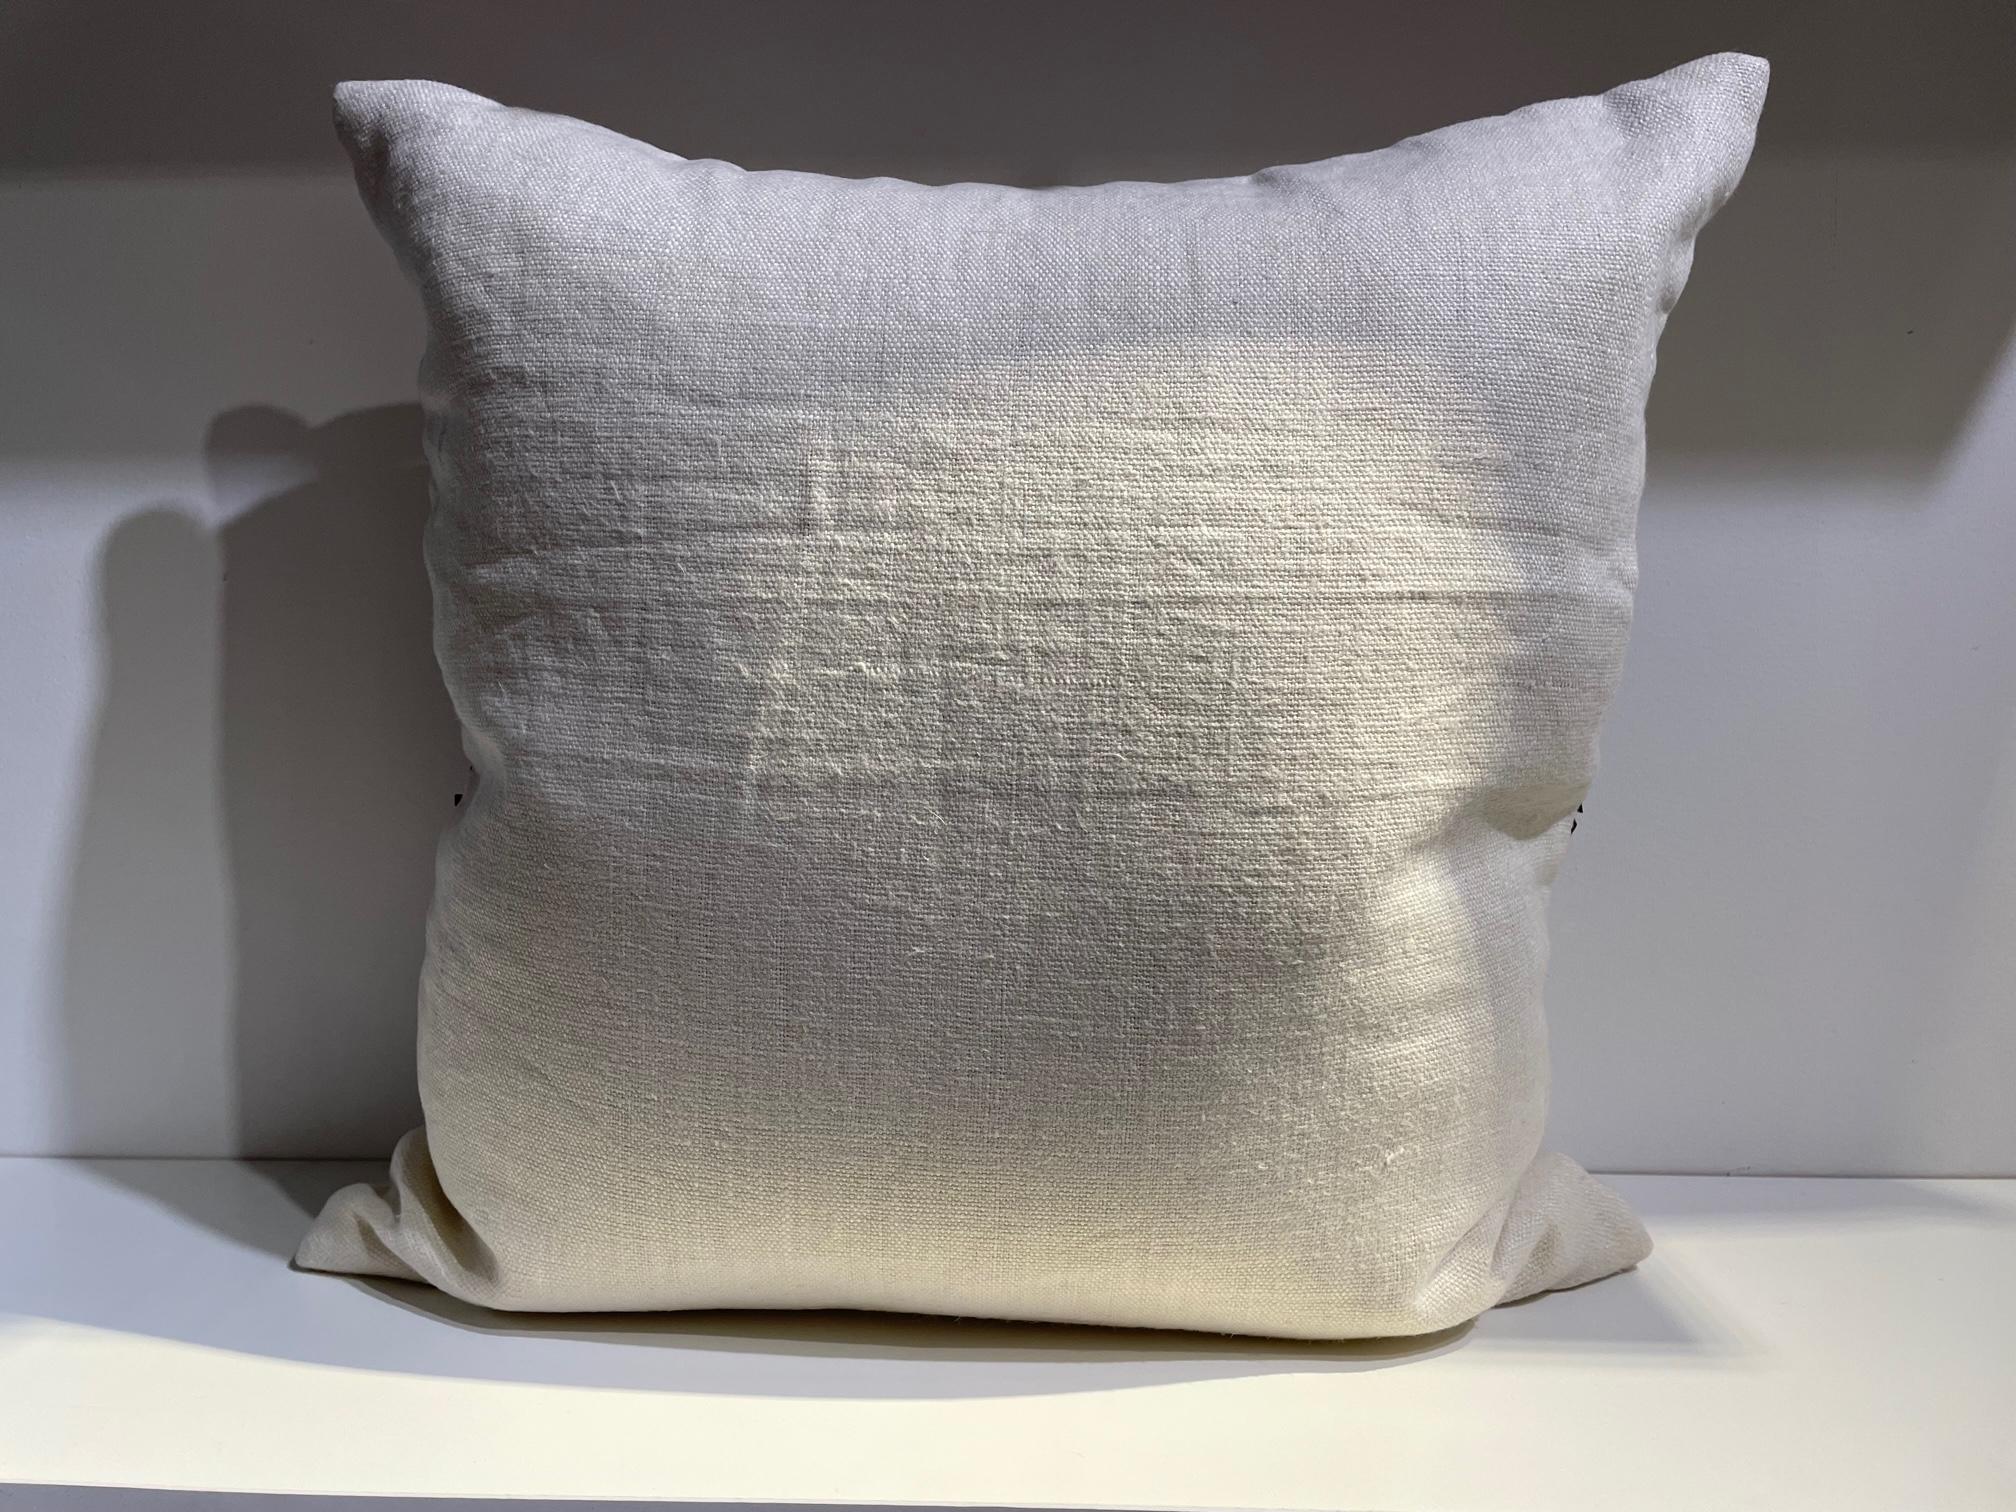 cushion size 50x50cm, hand embroidered with metal sequins col. Dark silver, base fabric handwoven linen col. Off-white, cushion cover with cotton lining, self piped, concealed zip, inner pad 100% new goose feathers.